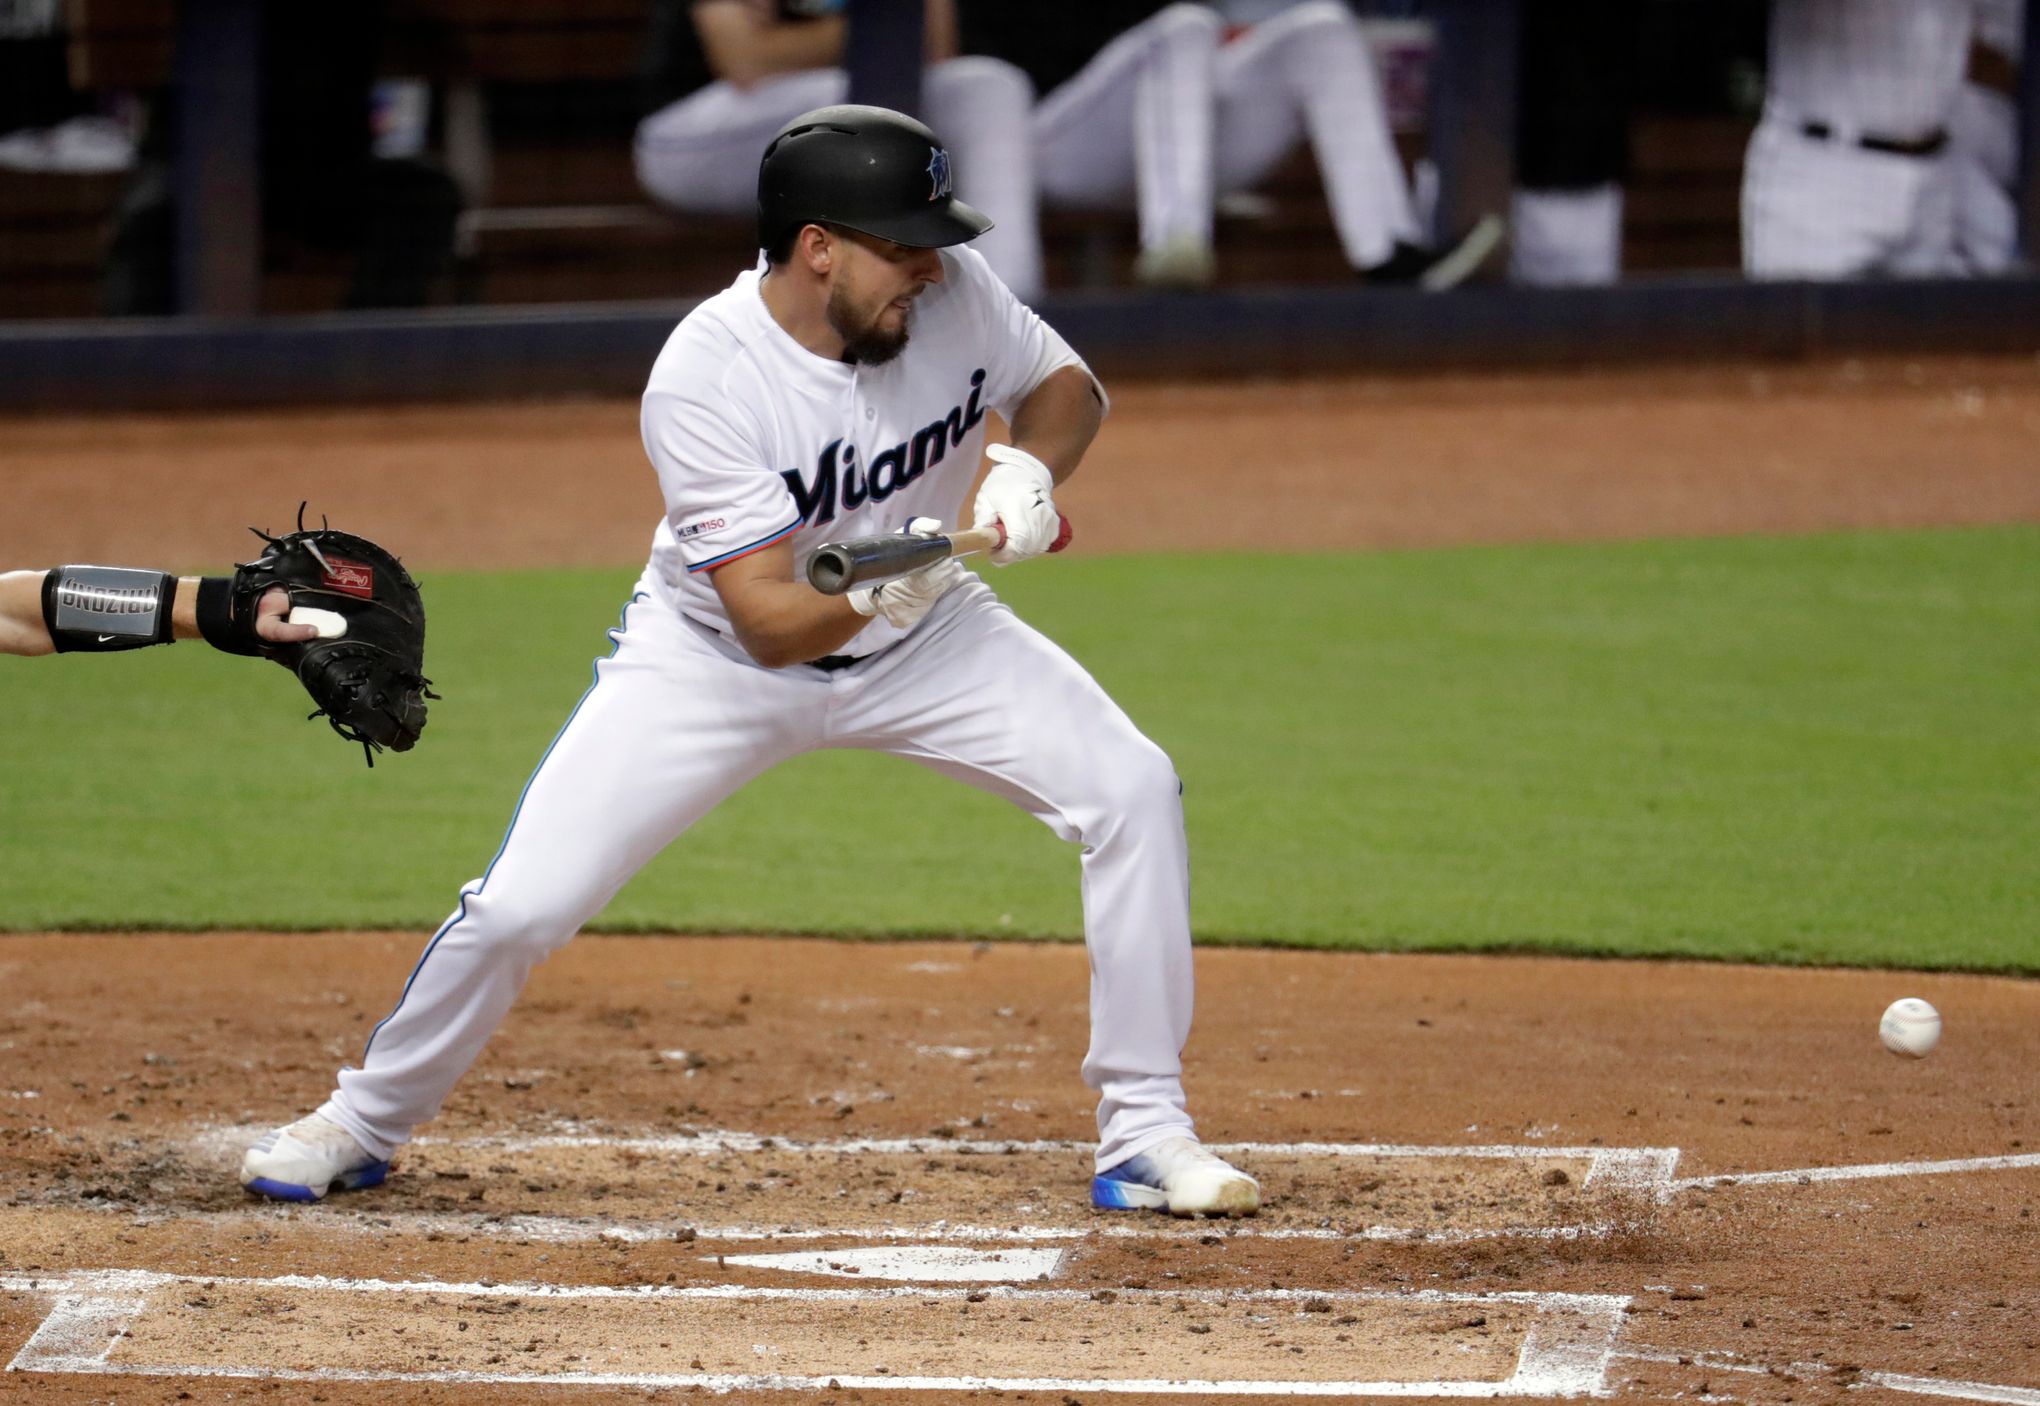 9th inning error gives Marlins 10-9 victory over Cards